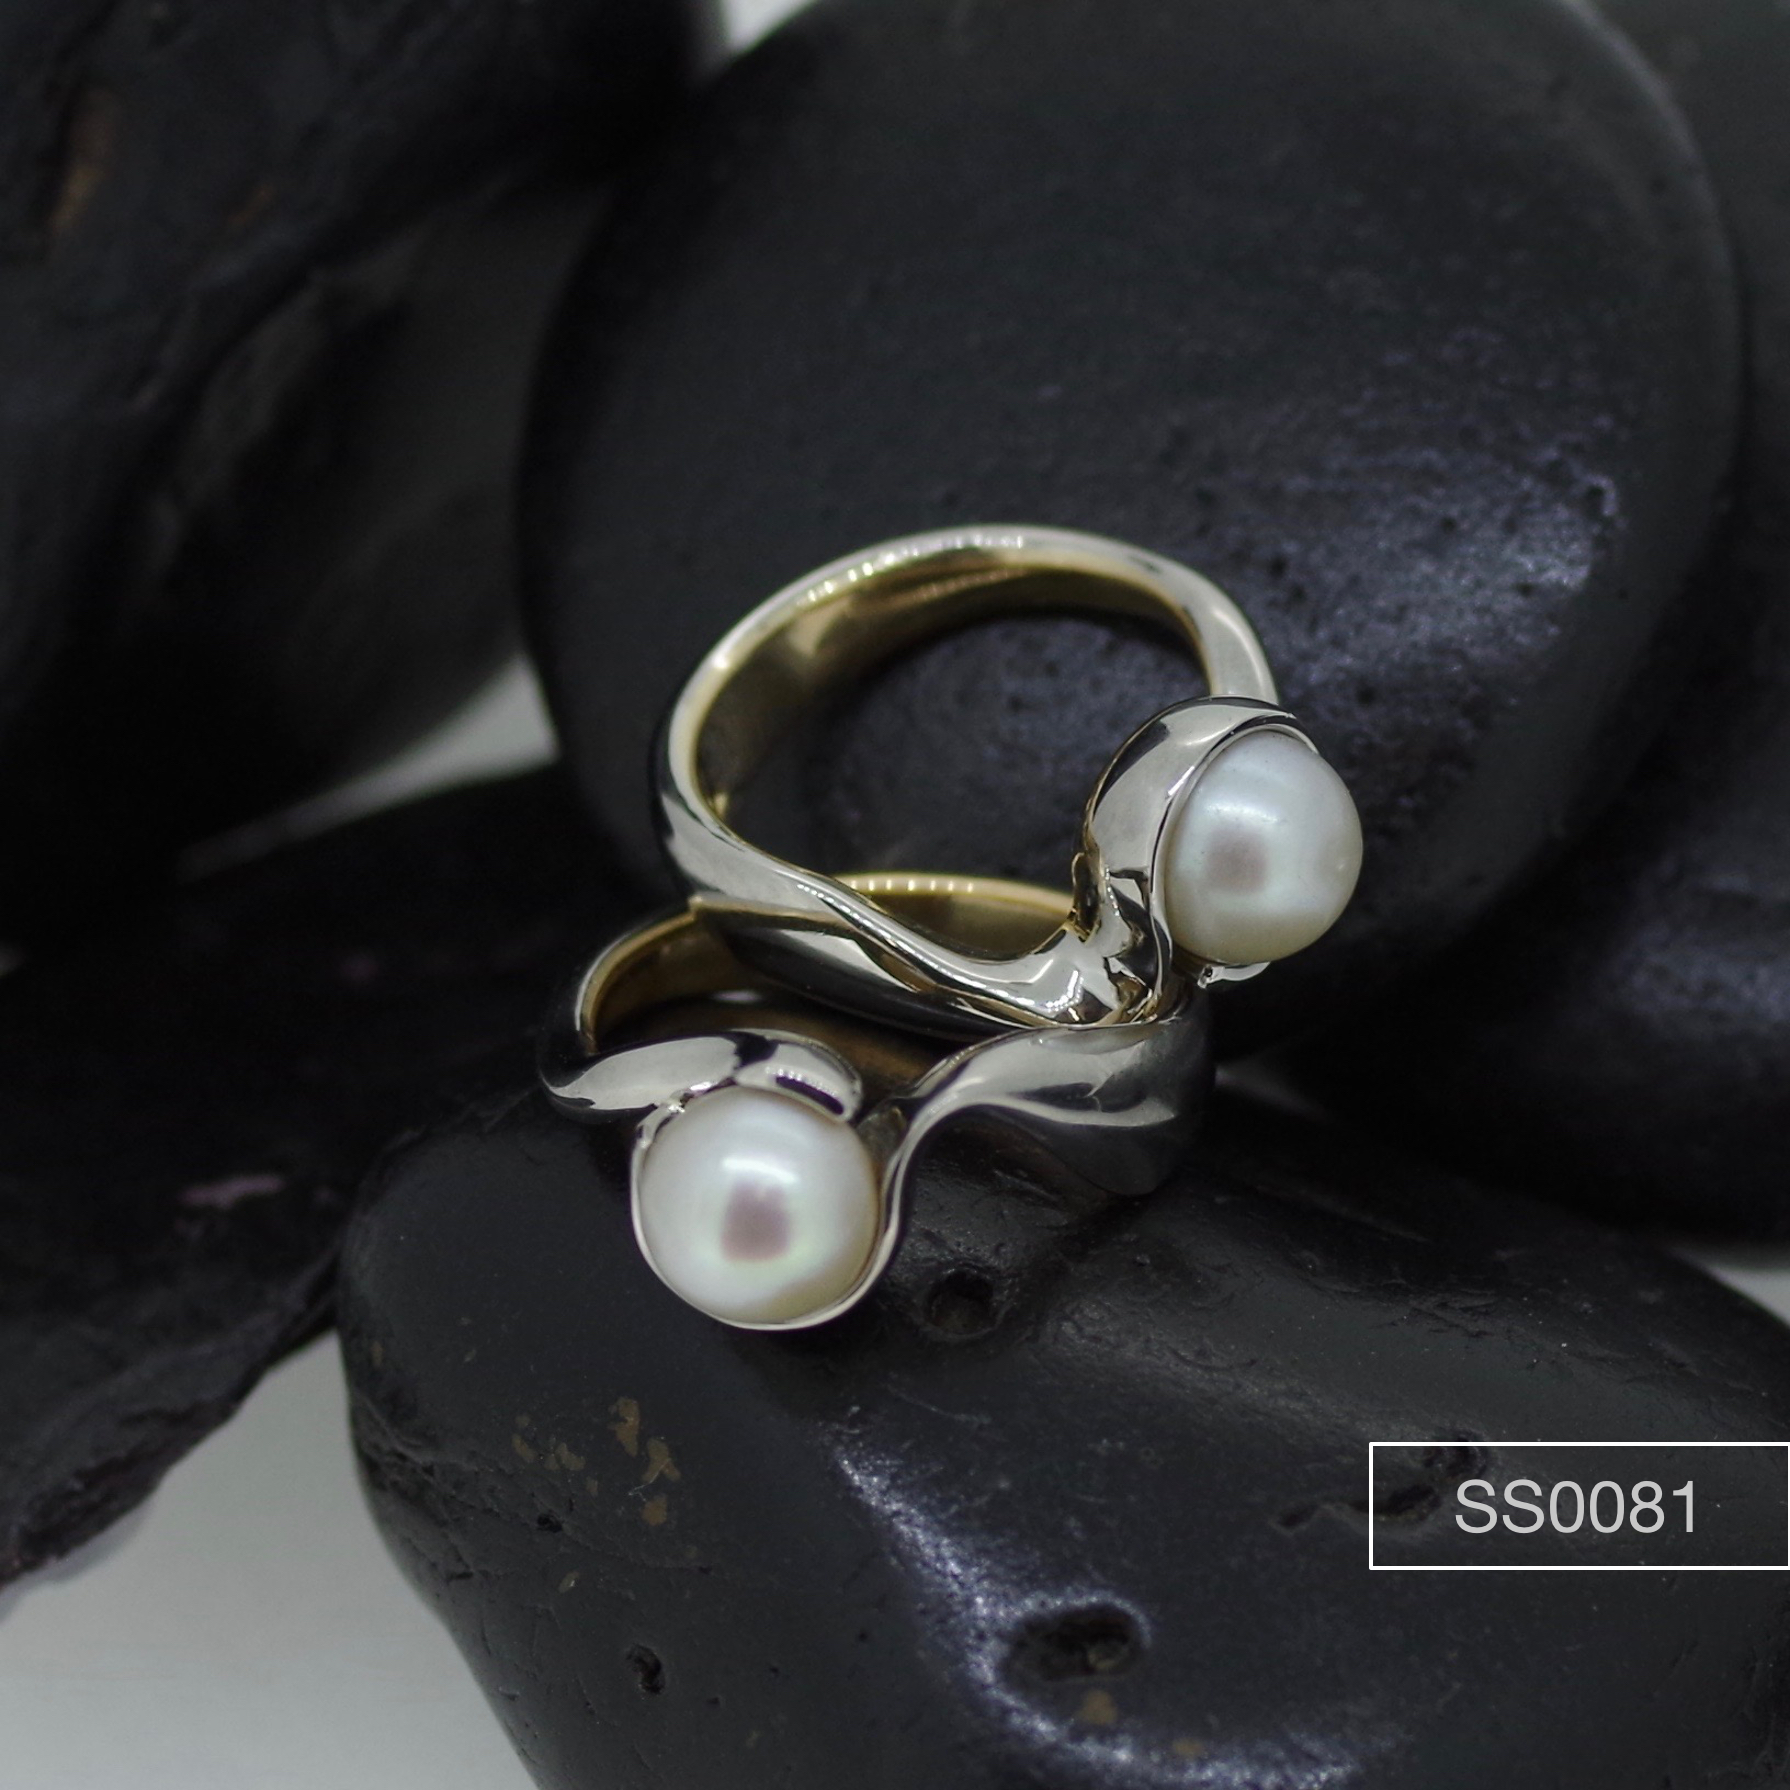 Set of Pearl rings made in white & yellow Gold.